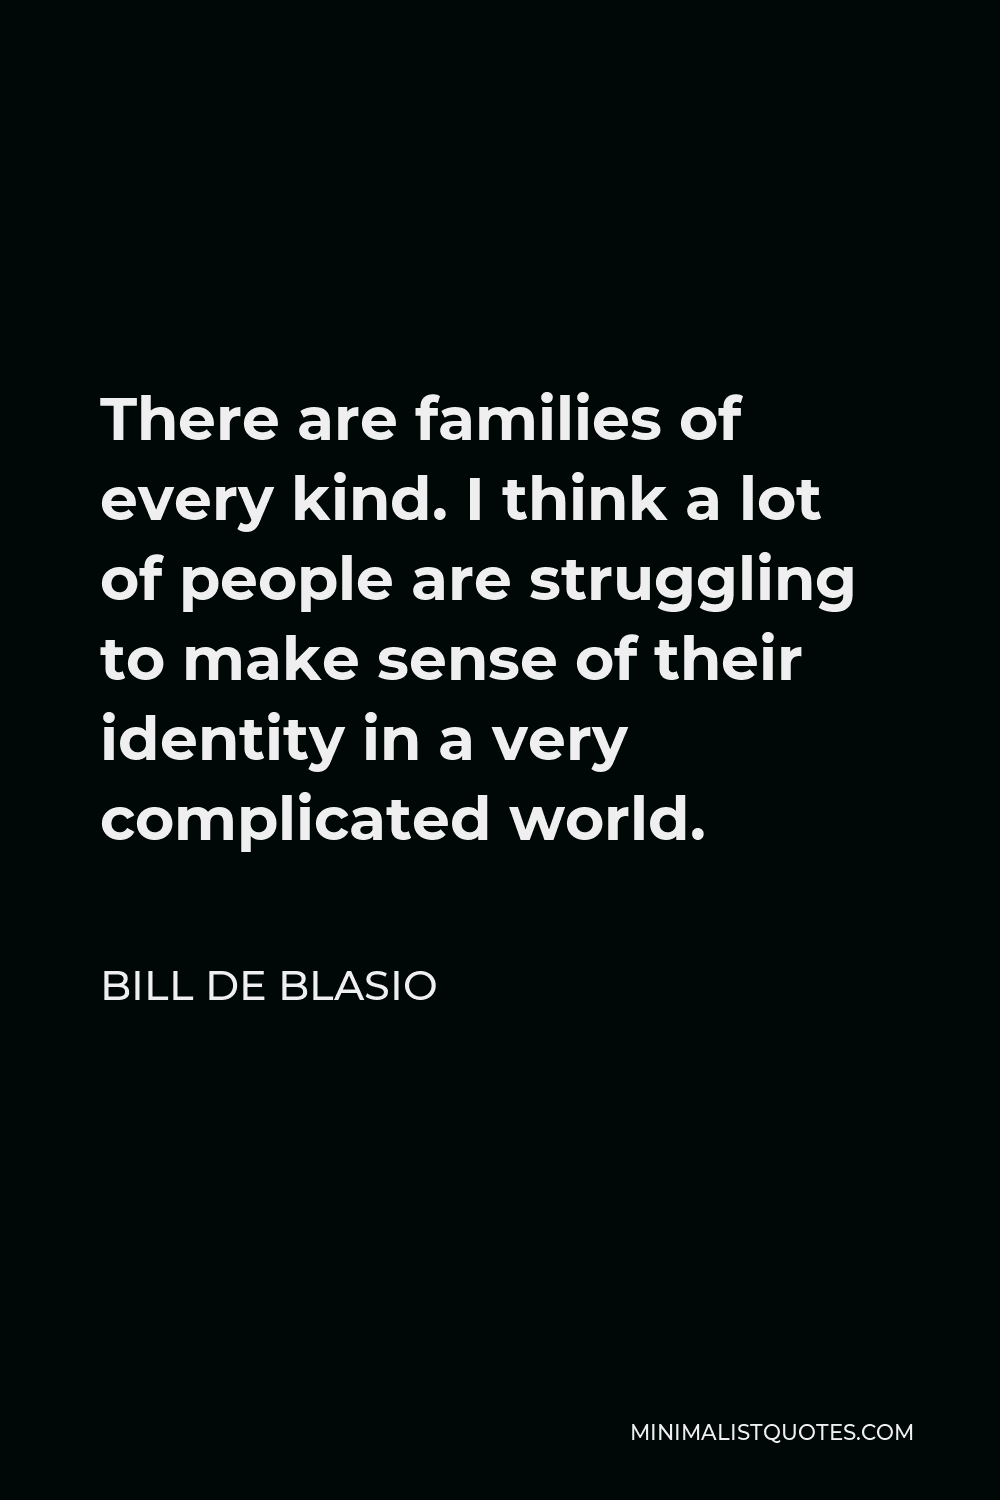 Bill de Blasio Quote - There are families of every kind. I think a lot of people are struggling to make sense of their identity in a very complicated world.